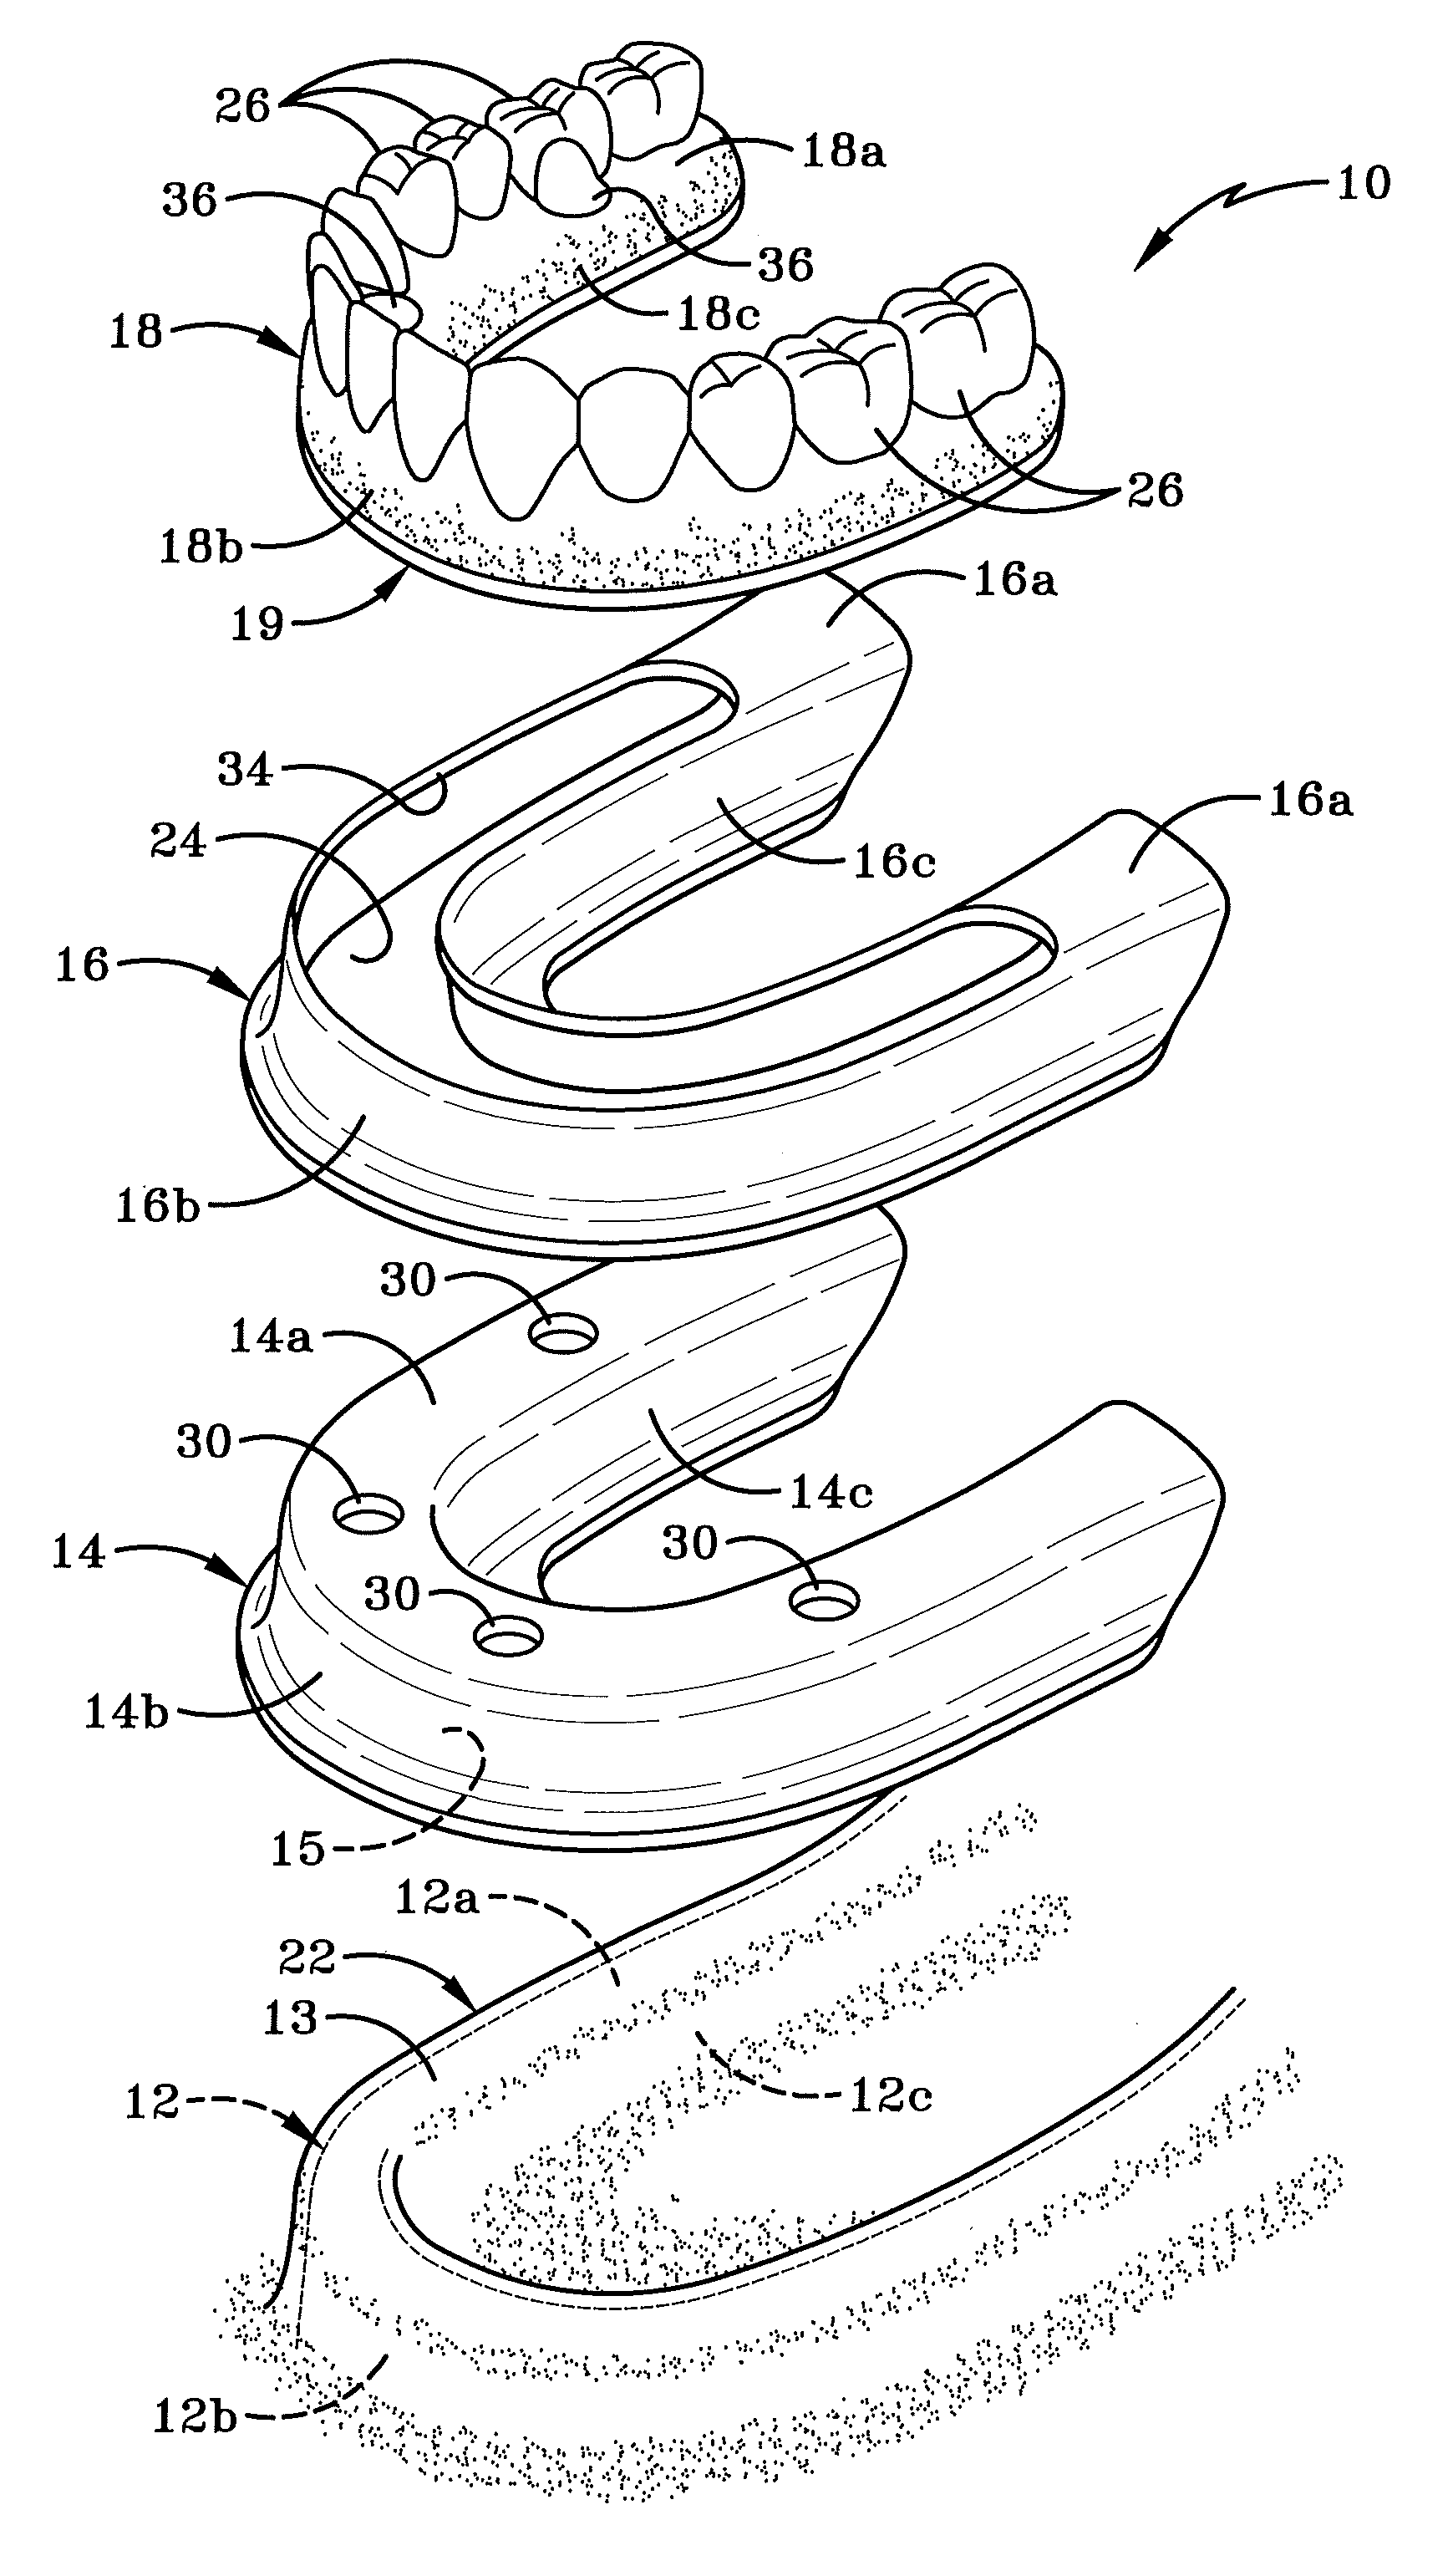 Cradle for positioning a final dental prosthesis and a system incorporating the cradle